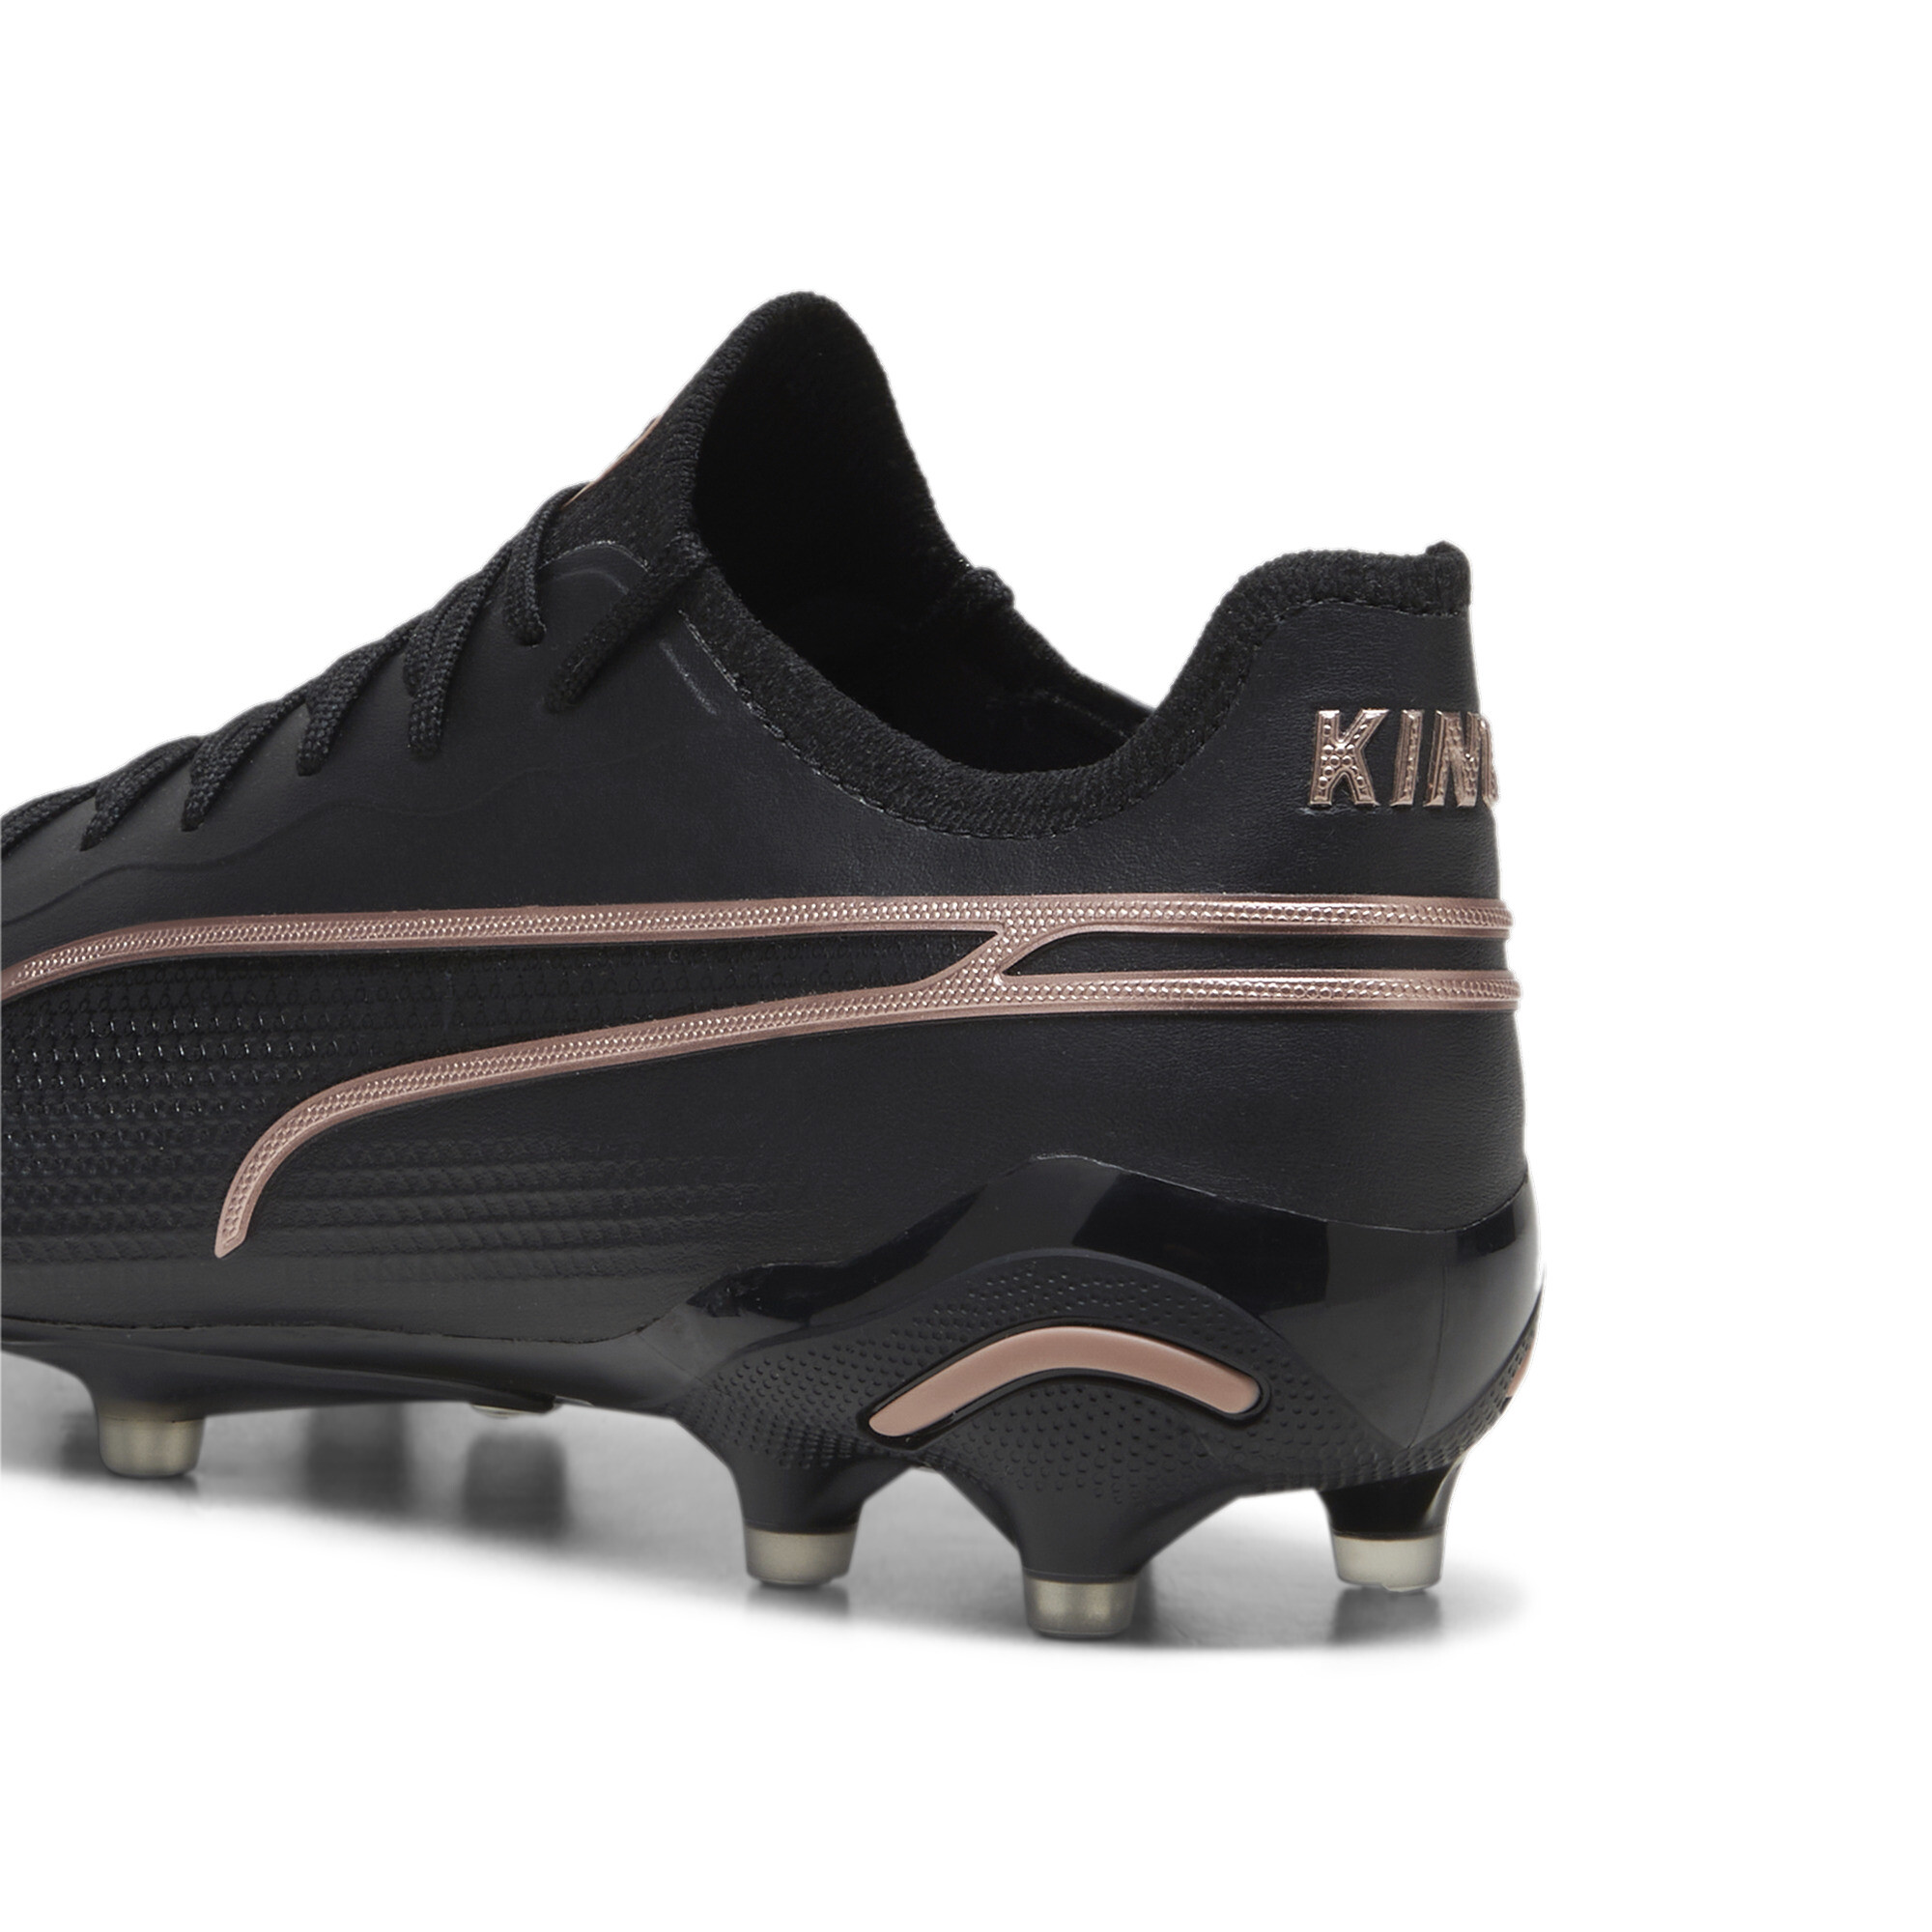 Men's PUMA KING ULTIMATE FG/AG Football Boots In Black, Size EU 46